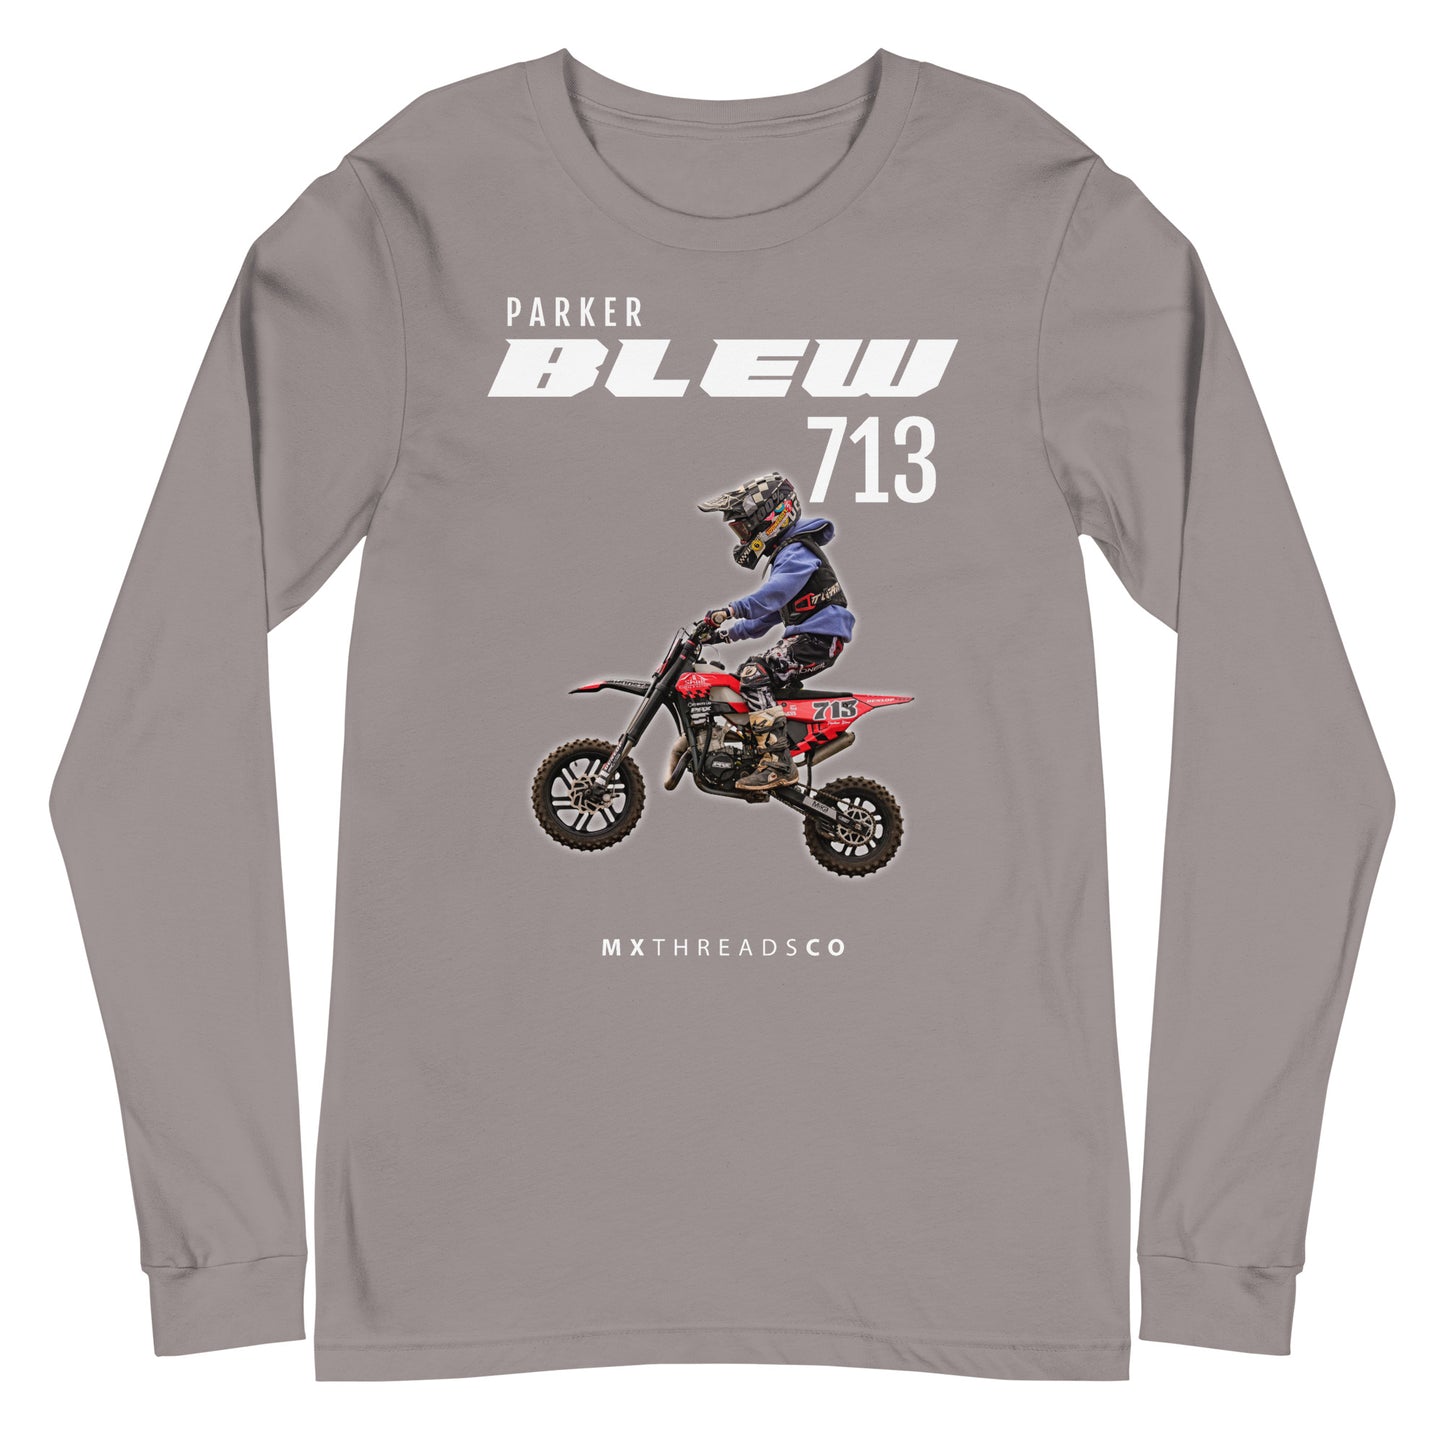 Parker Blew Photo-Graphic Series Long Sleeve T-Shirt